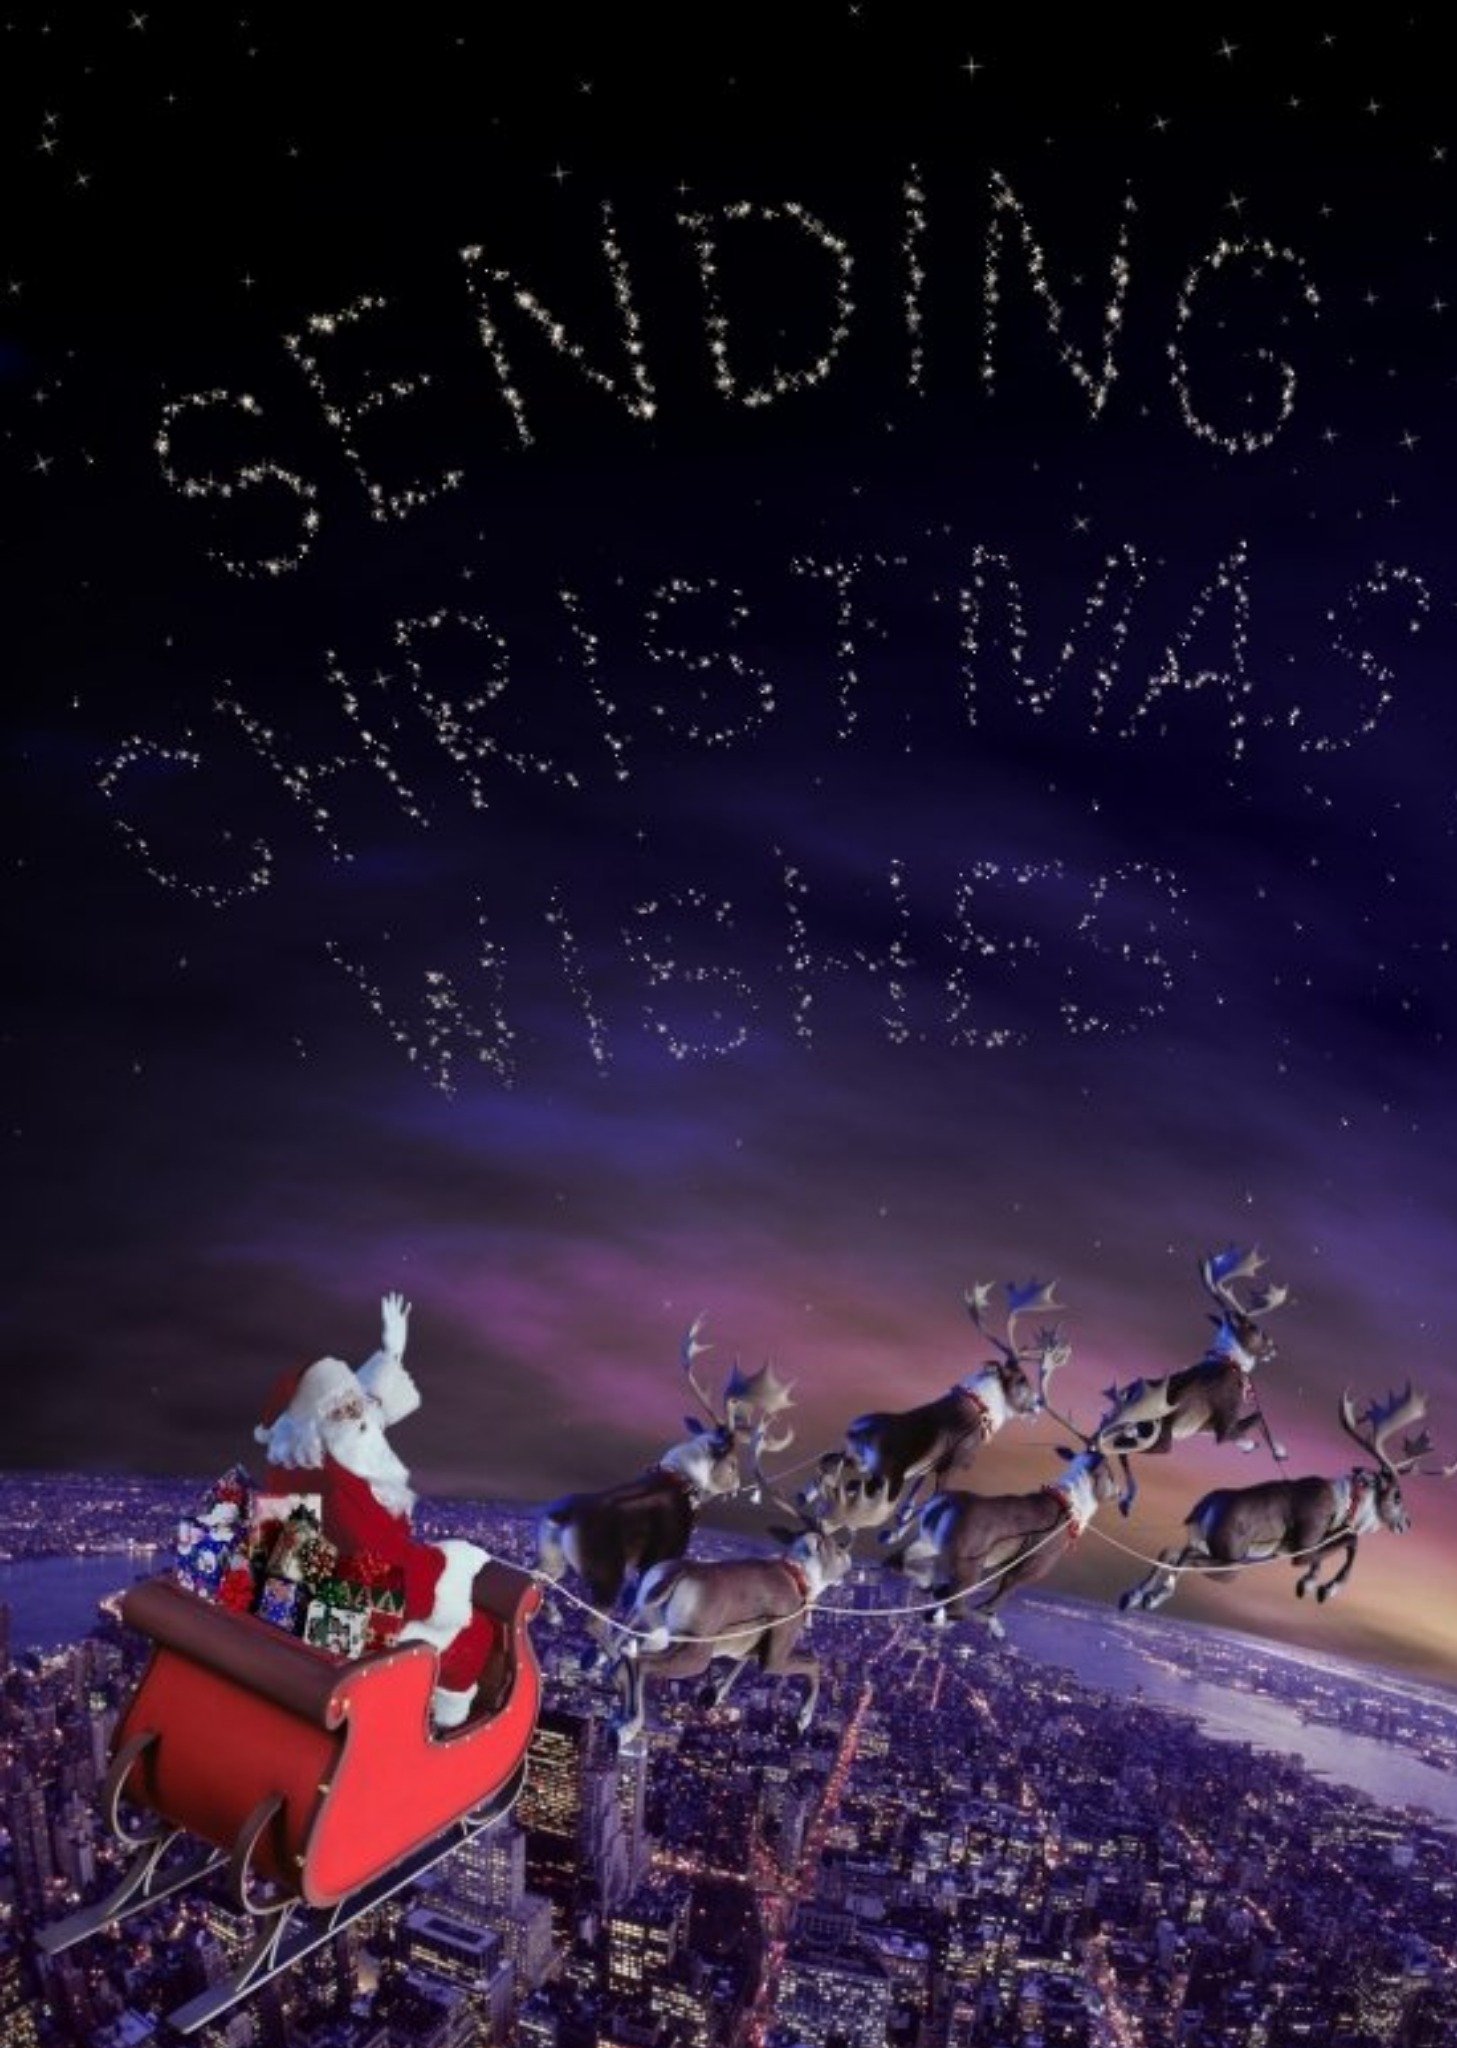 Moonpig Santa And His Sleigh Message In The Stars Personalised Merry Christmas Card, Large